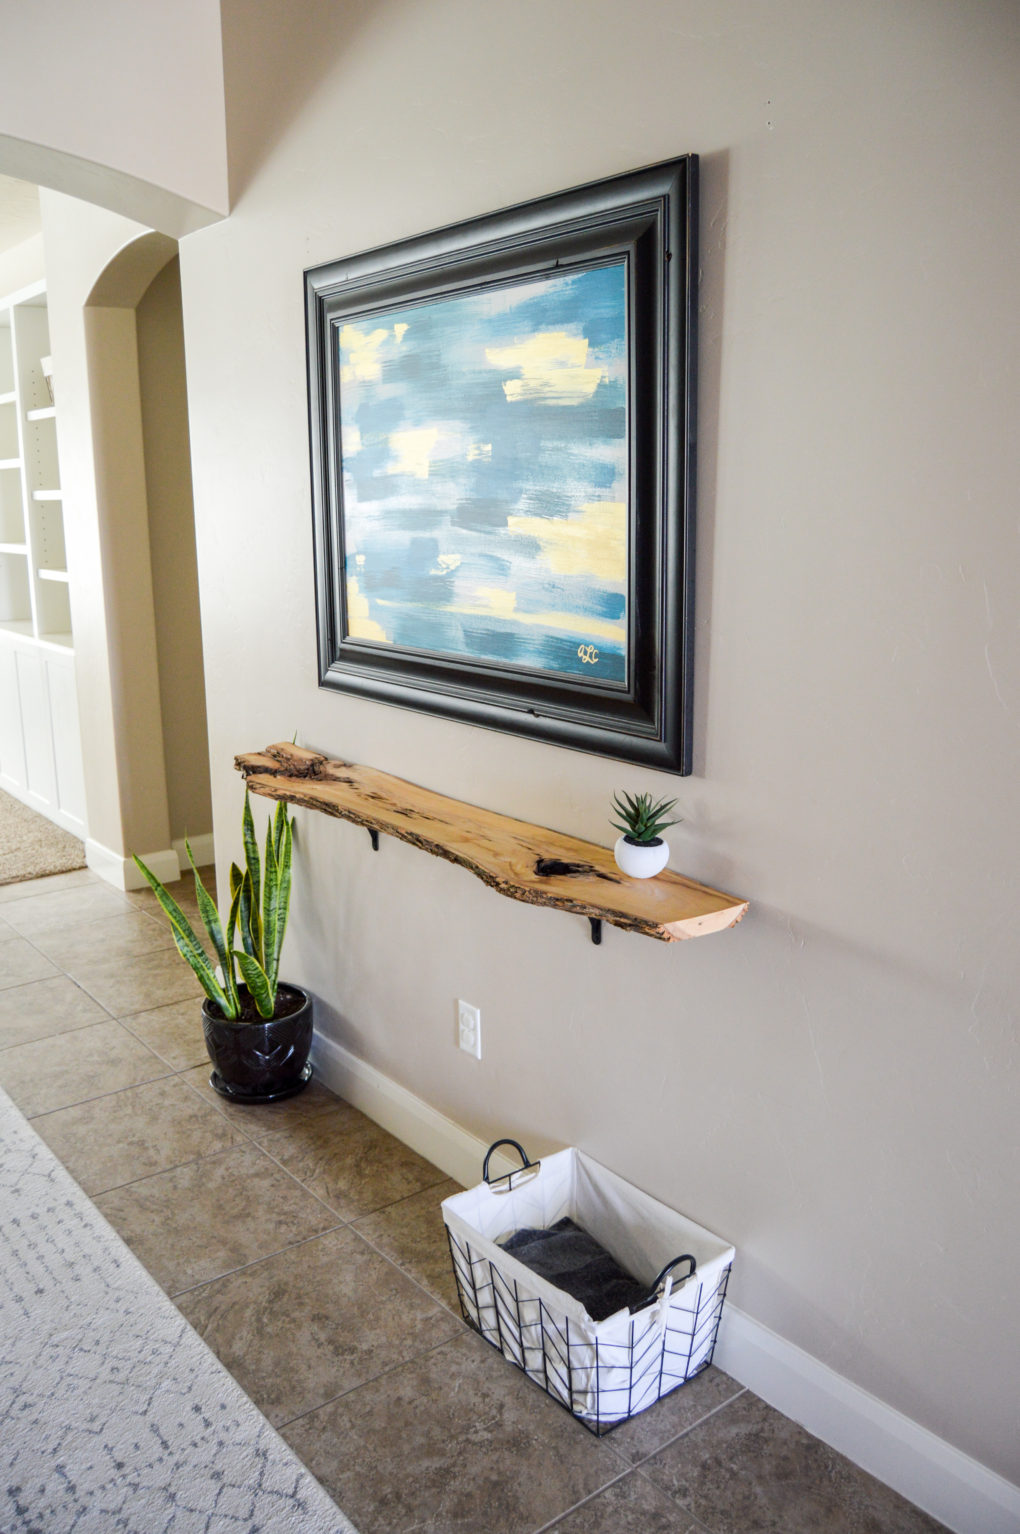 Live edge wood shelf in long hallway entry. Large modern art. Industrial modern look with a boho vibe.